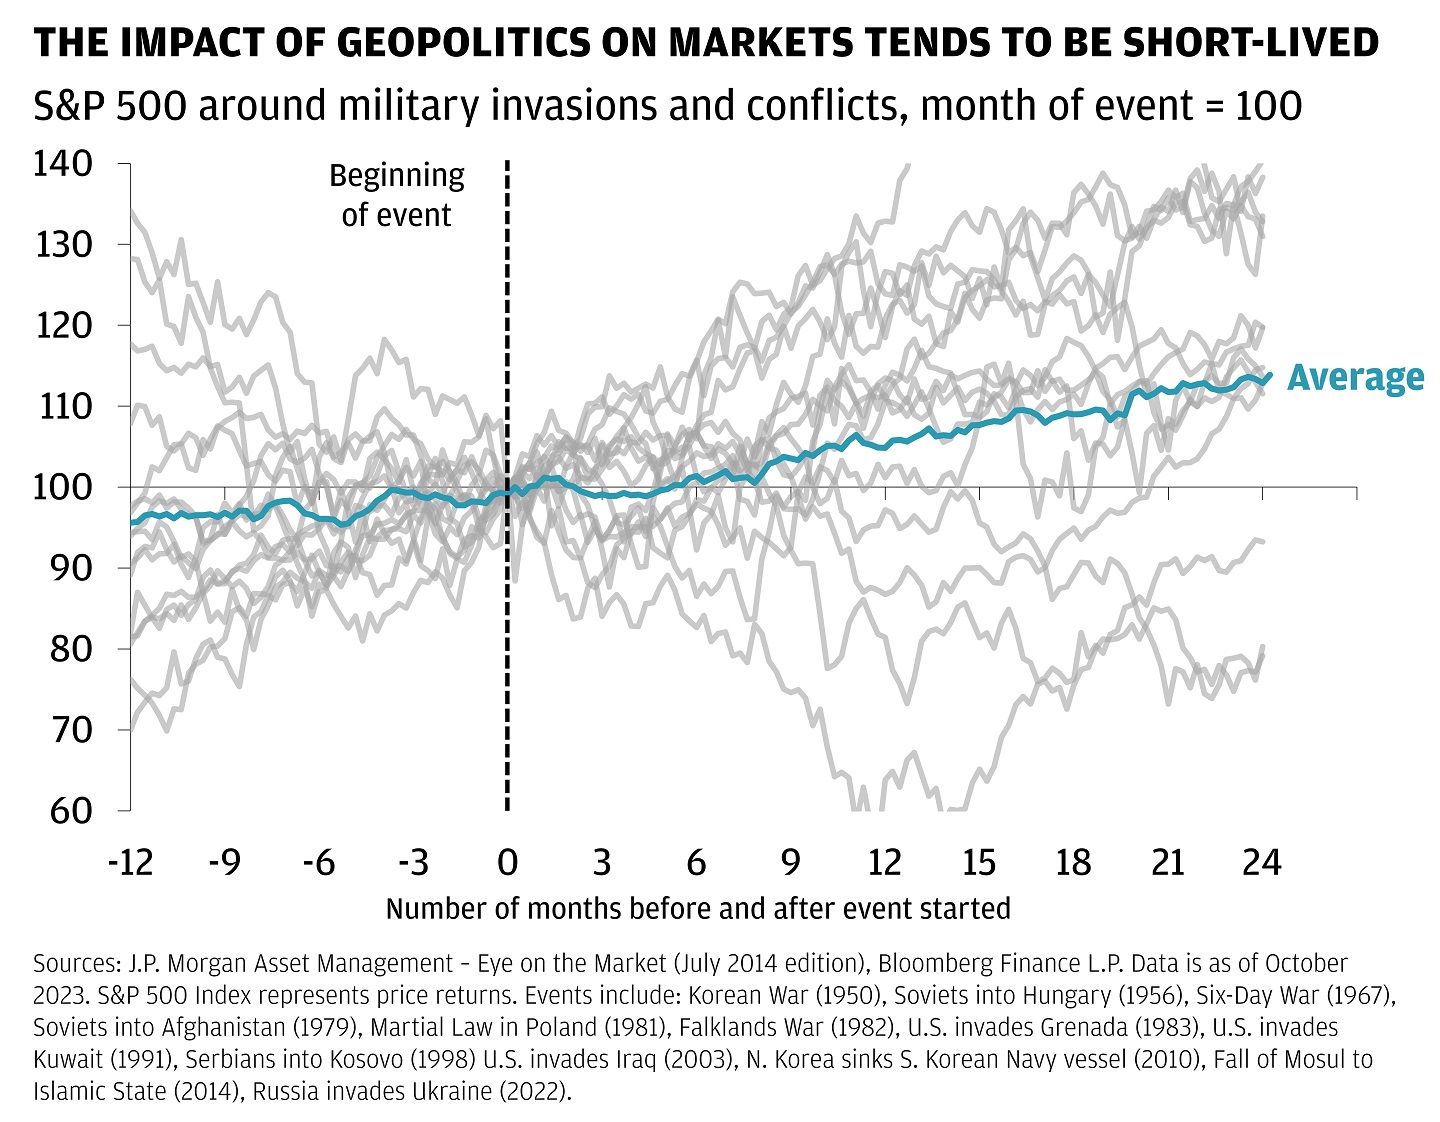 This line graph shows the S&P 500’s performance during the 12 months leading up to a geopolitical event and the two years following.